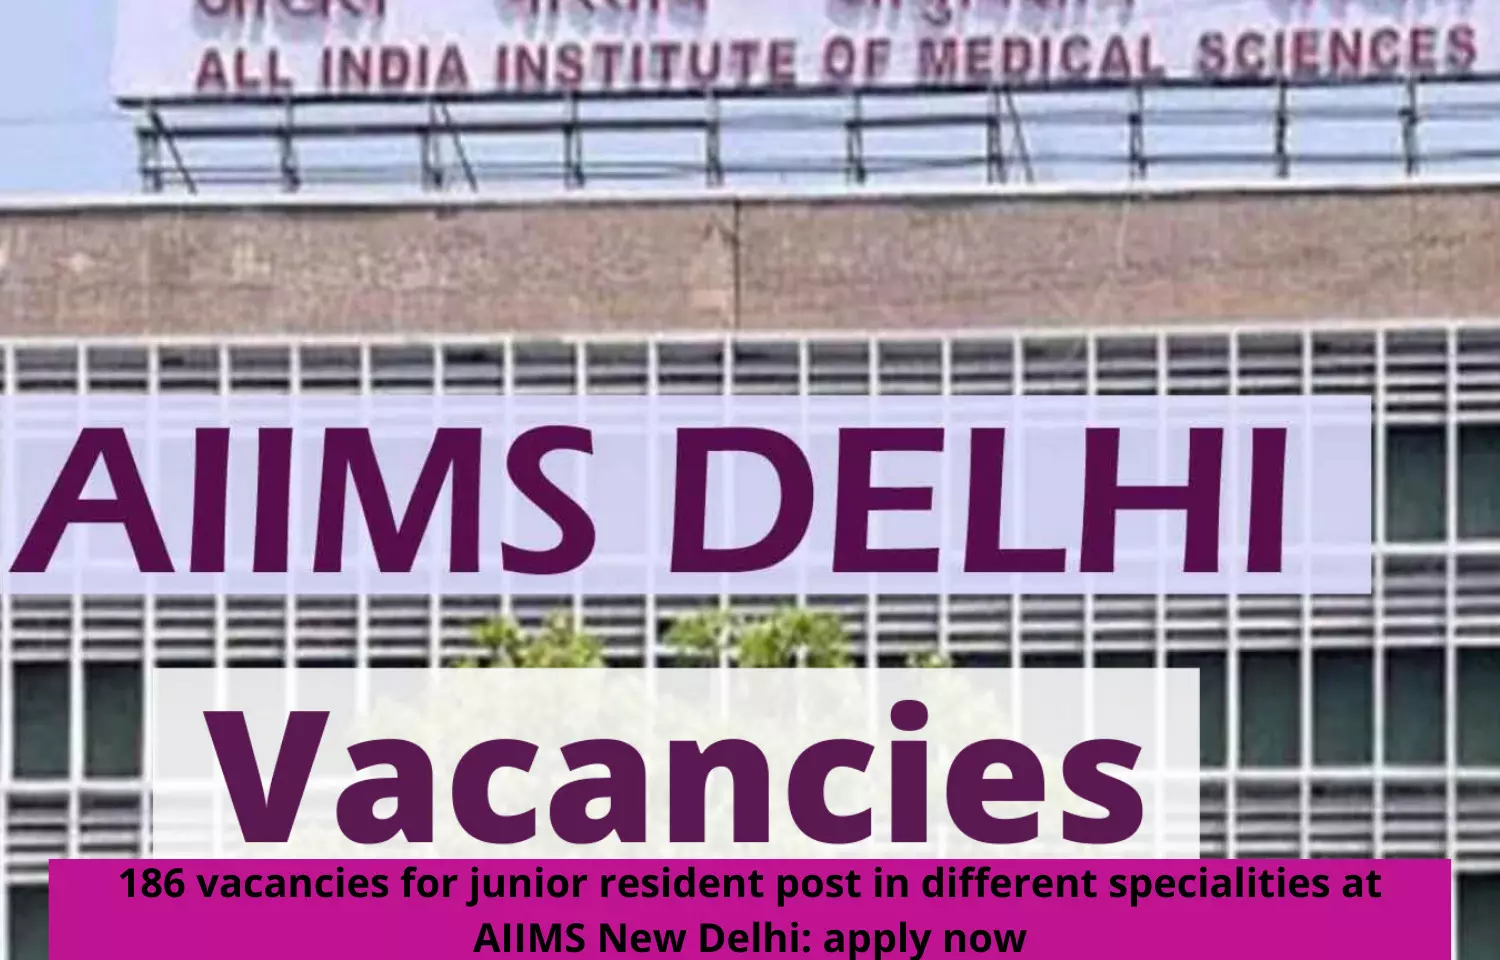 Apply now at AIIMS New Delhi for 186 posts for junior resident in different specialities